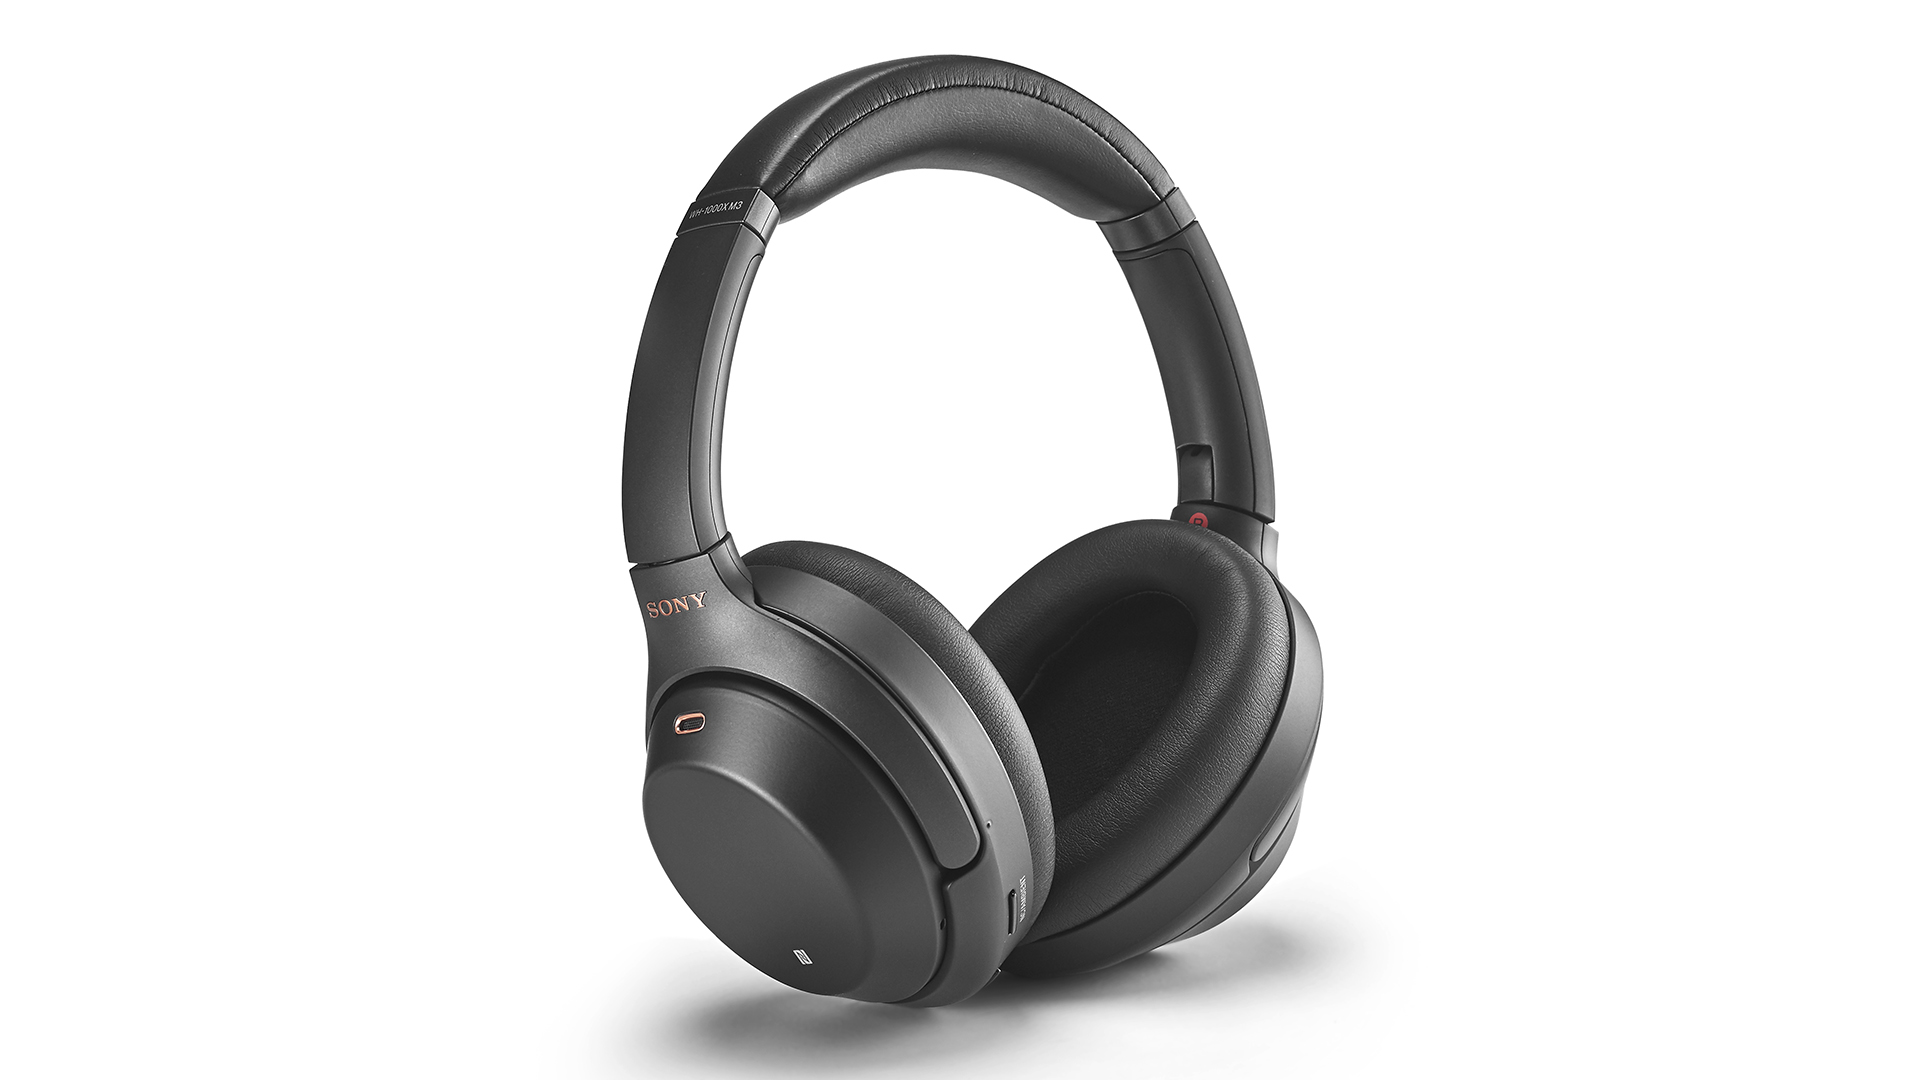 Sony WH-1000XM3 wireless headphones drop to lowest ever price at 